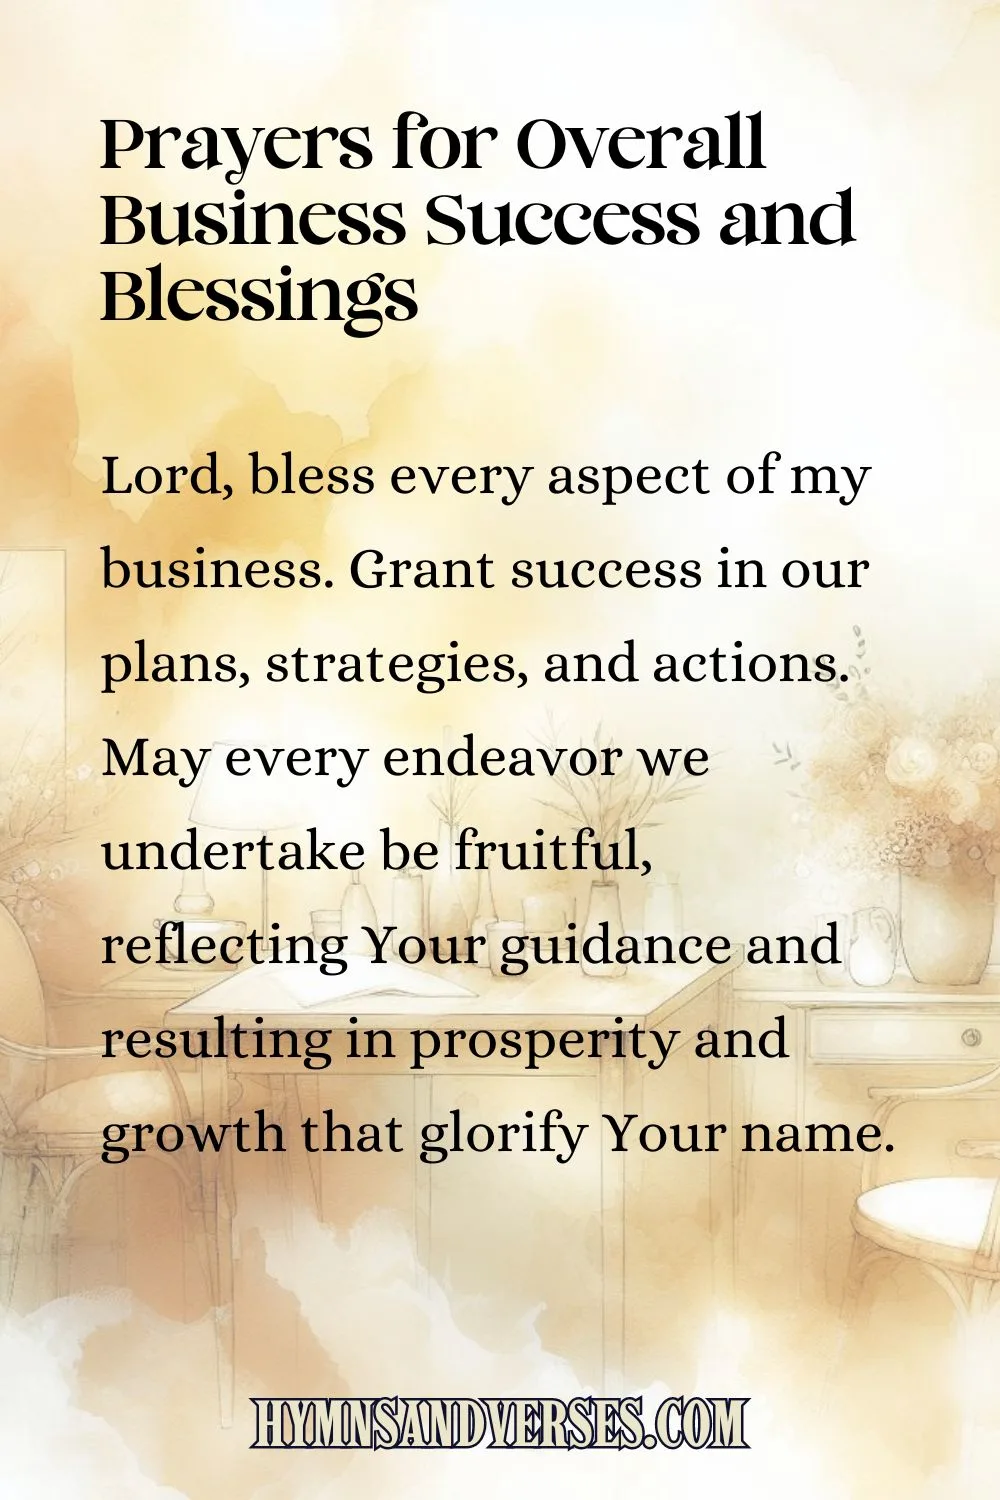 Pin sized image for Prayers for Overall Business Success and Blessings, reads: Lord, bless every aspect of my business. Grant success in our plans, strategies, and actions. May every endeavor we undertake be fruitful, reflecting Your guidance and resulting in prosperity and growth that glorify Your name.